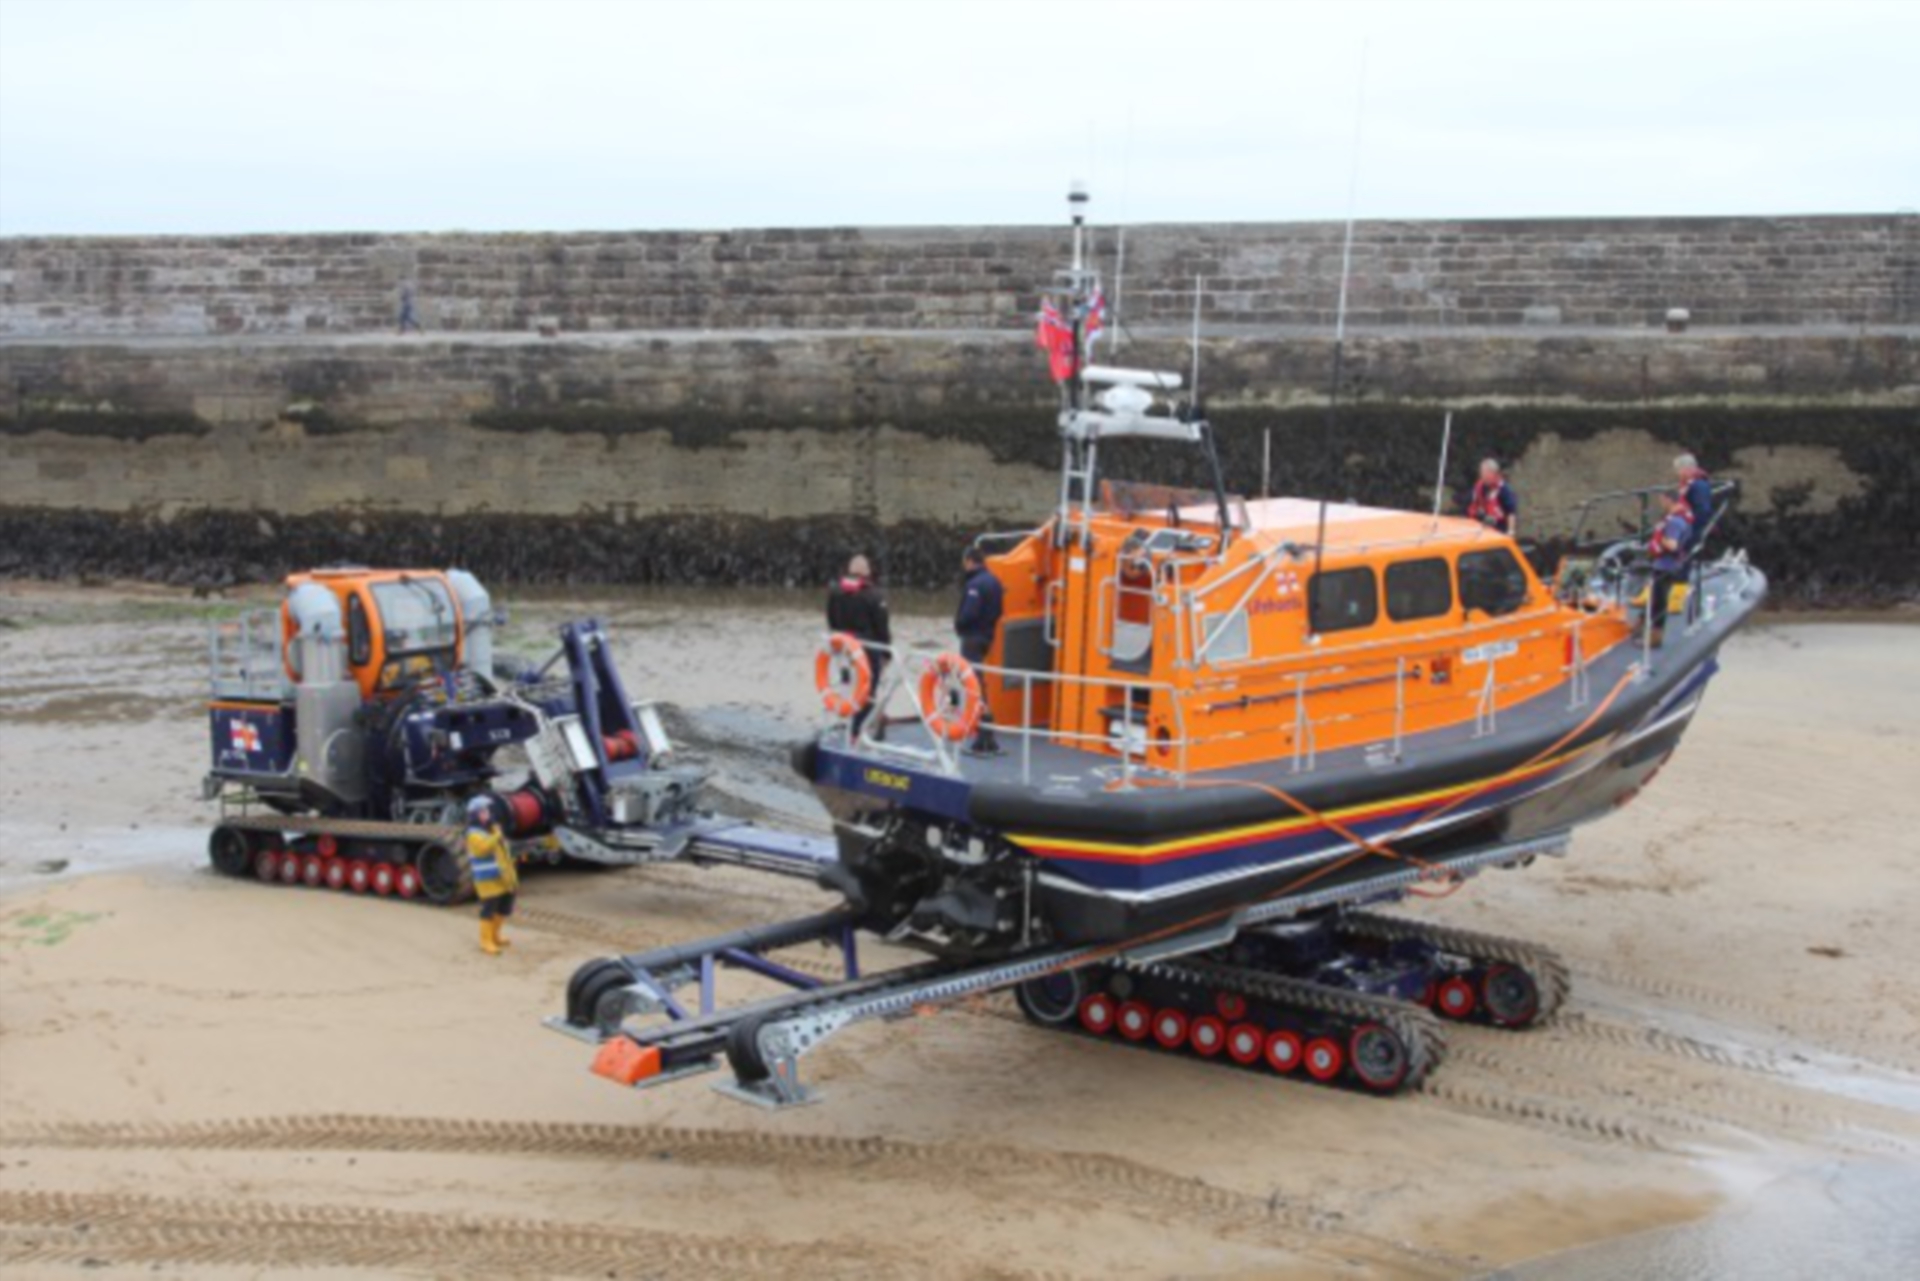 The new lifeboat  and Supercat rig undergoing trials.